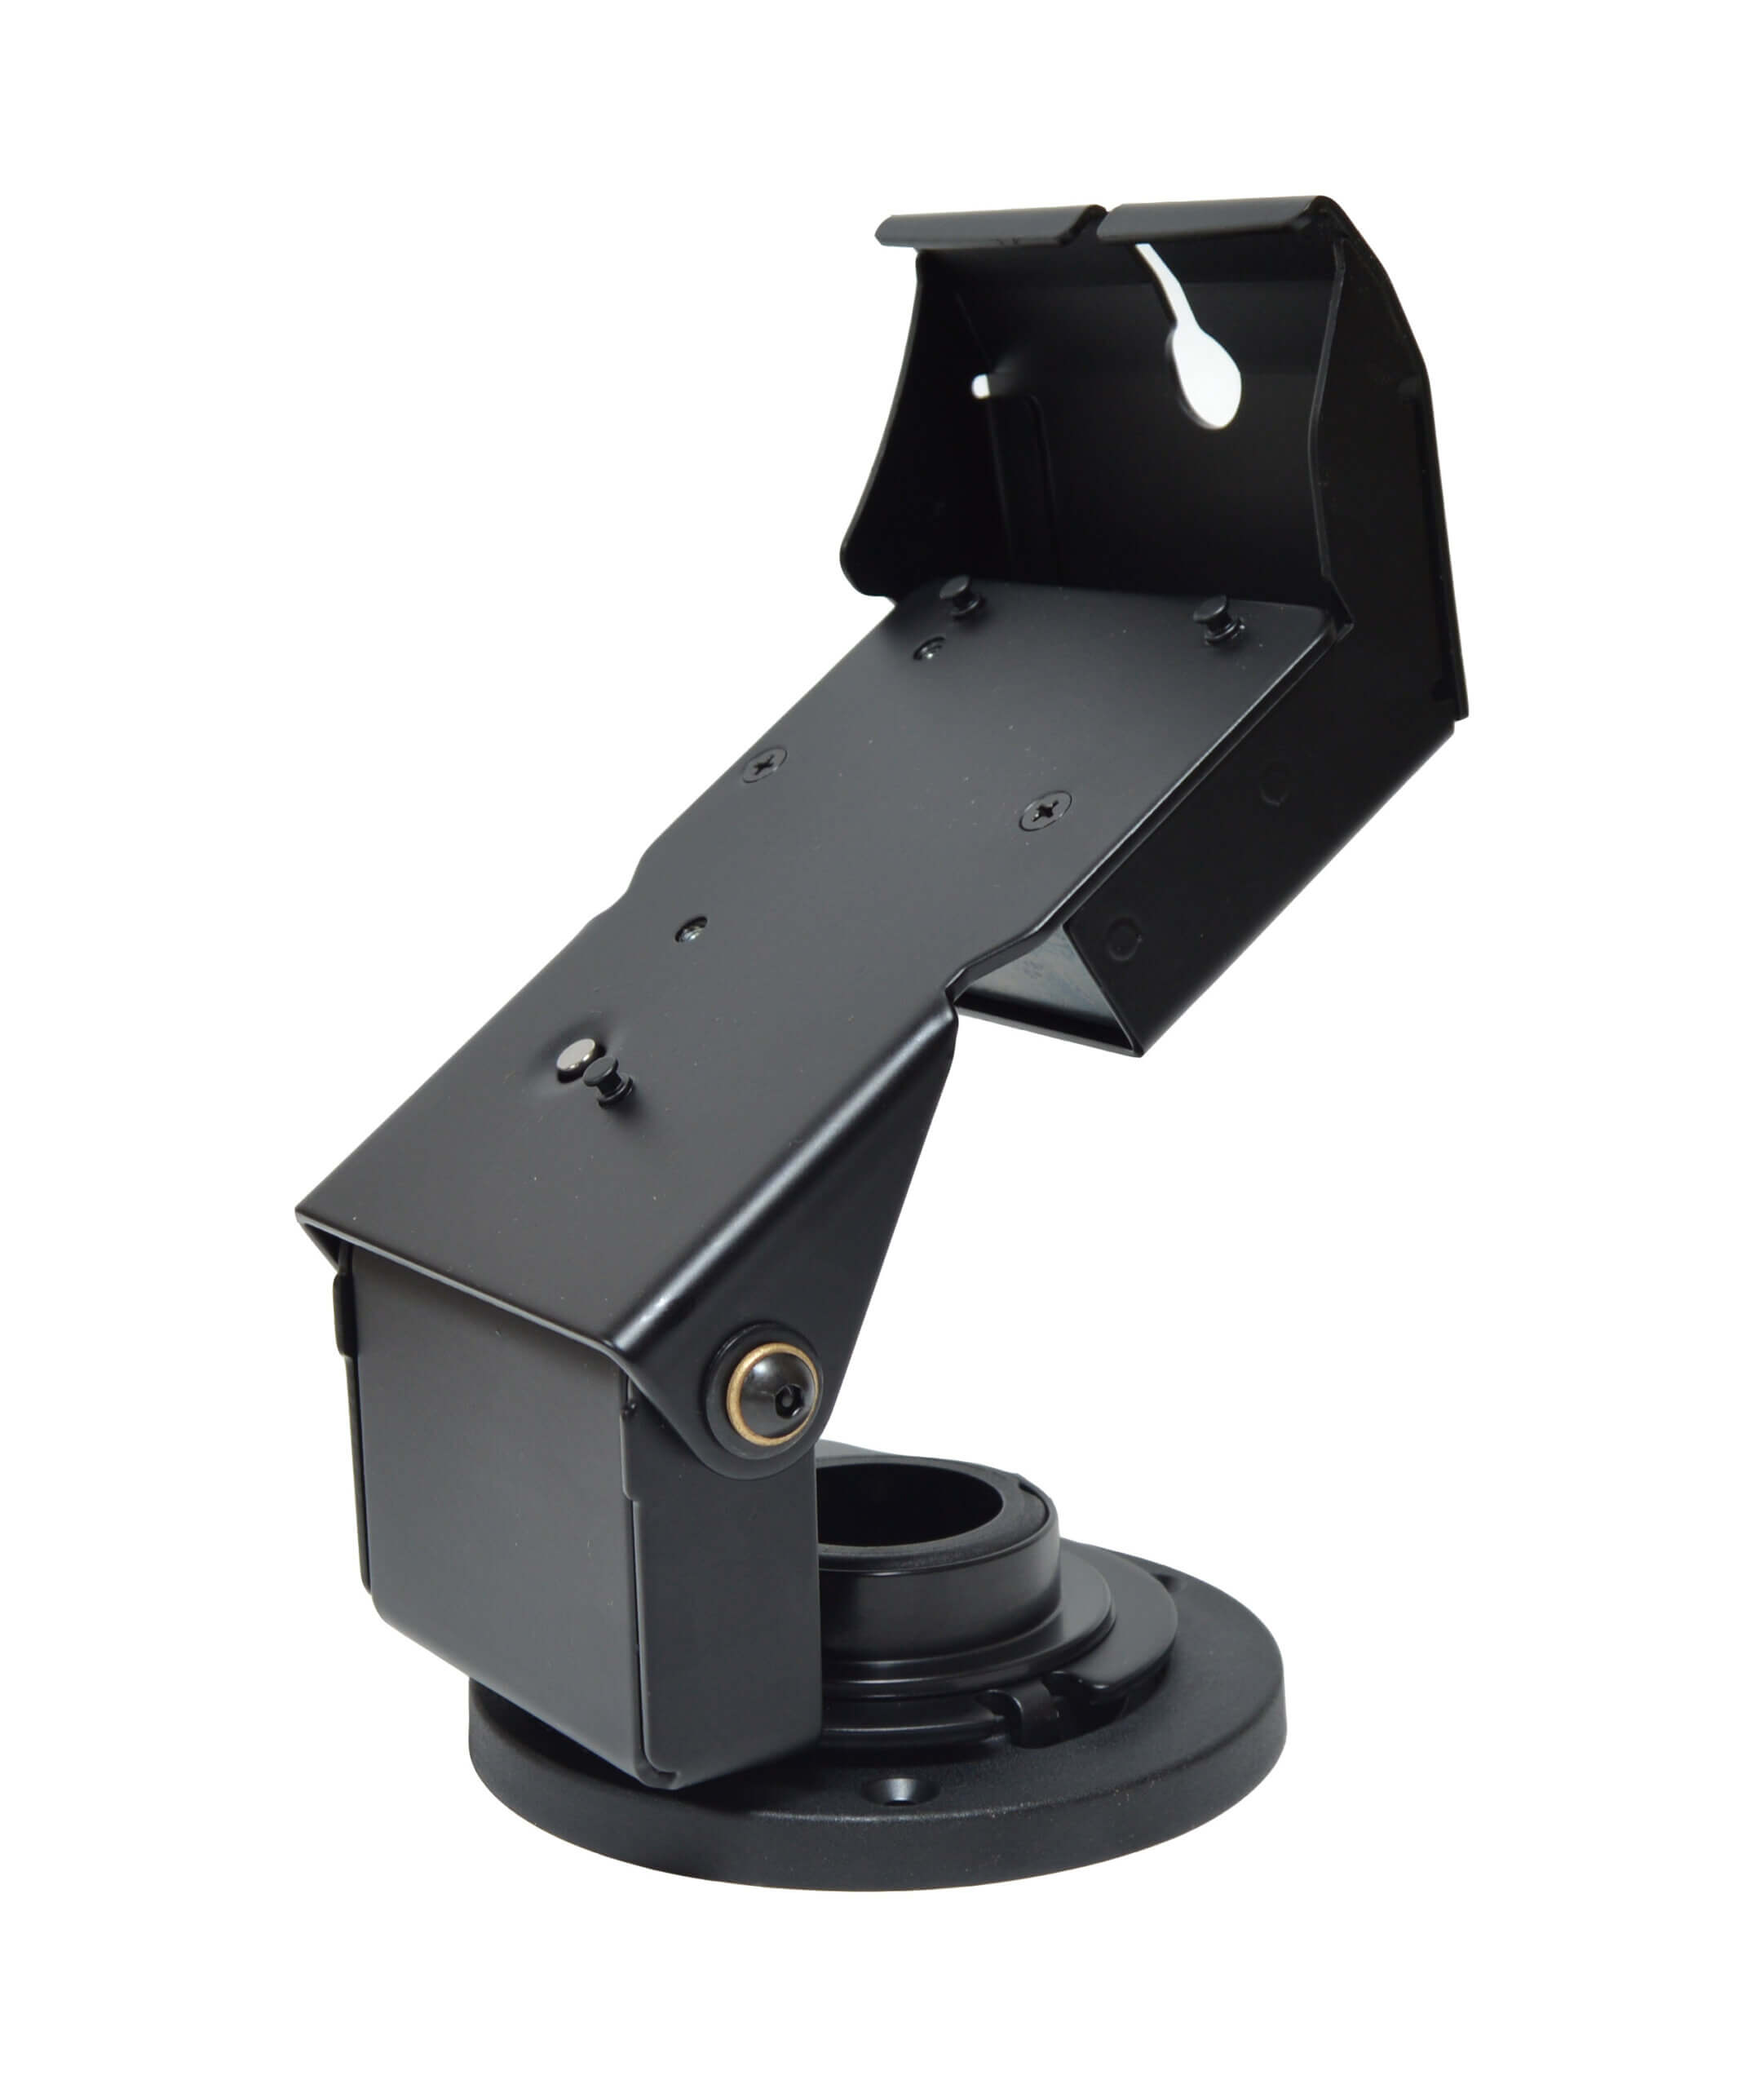 Round Base Metal Stand for Verifone M400 Payment Terminals